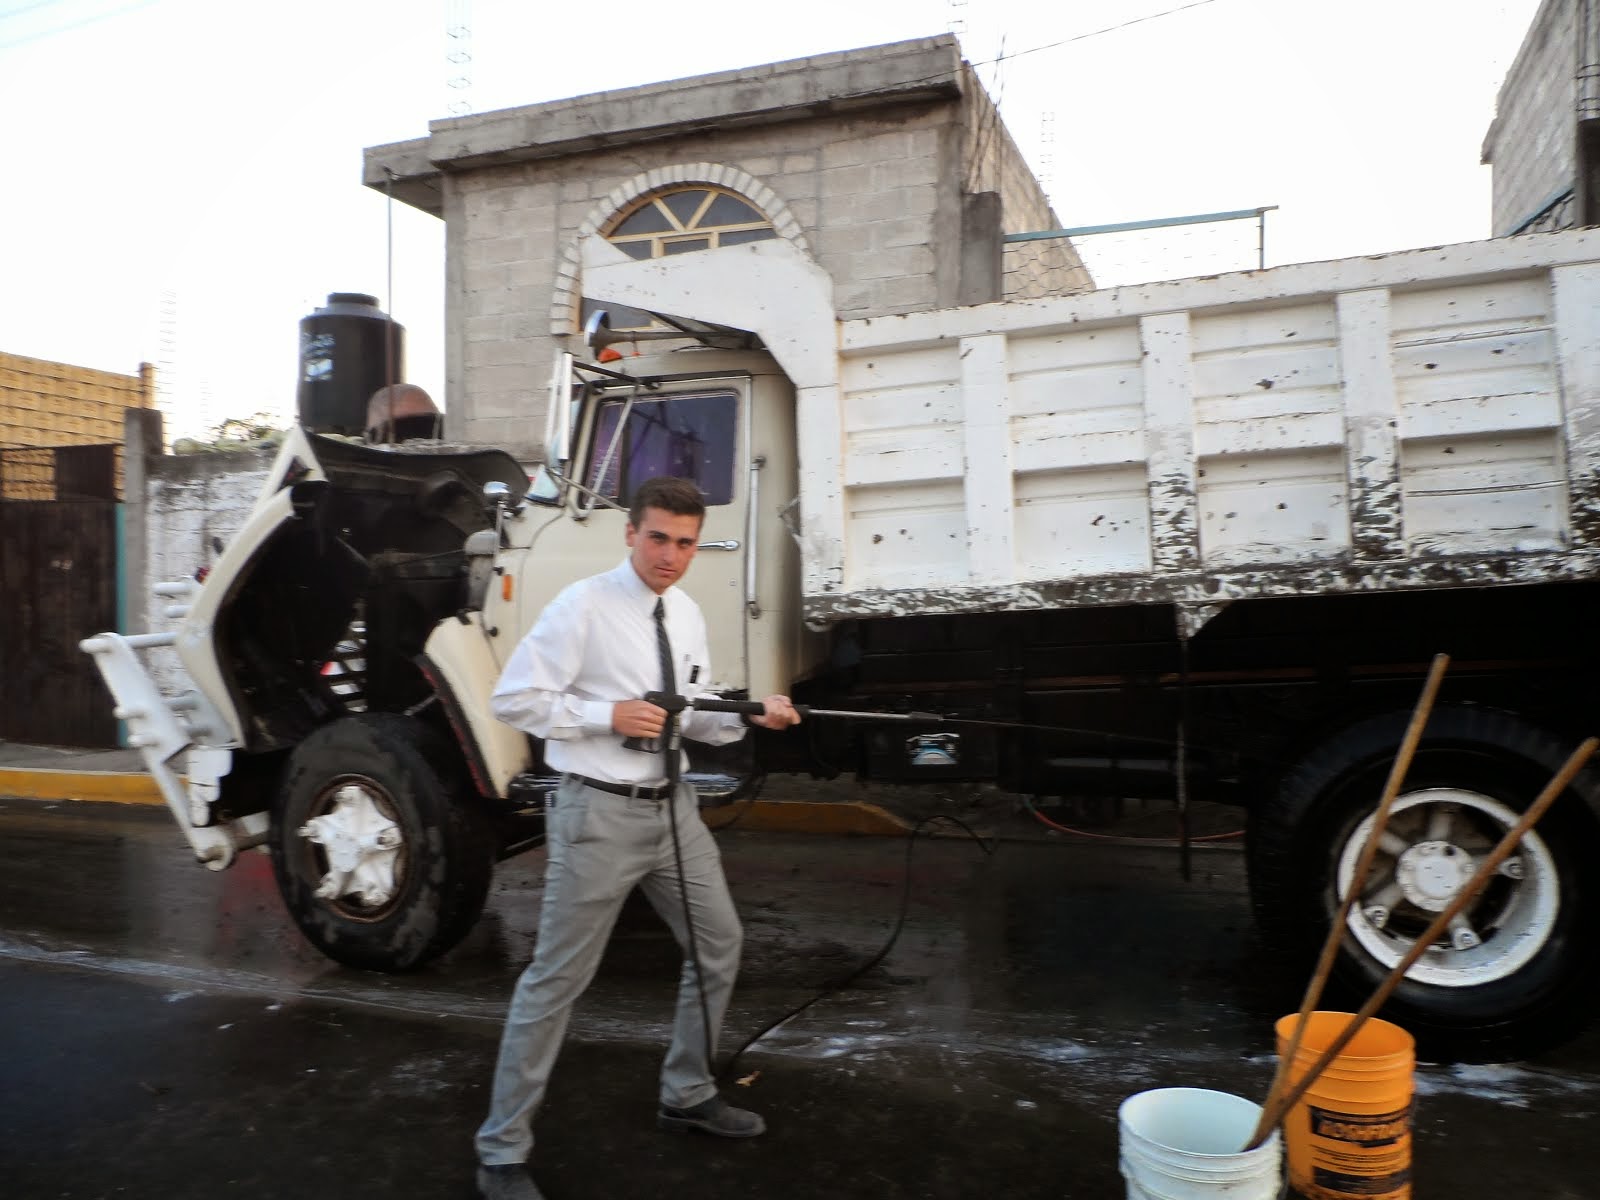 helping to wash up that truck